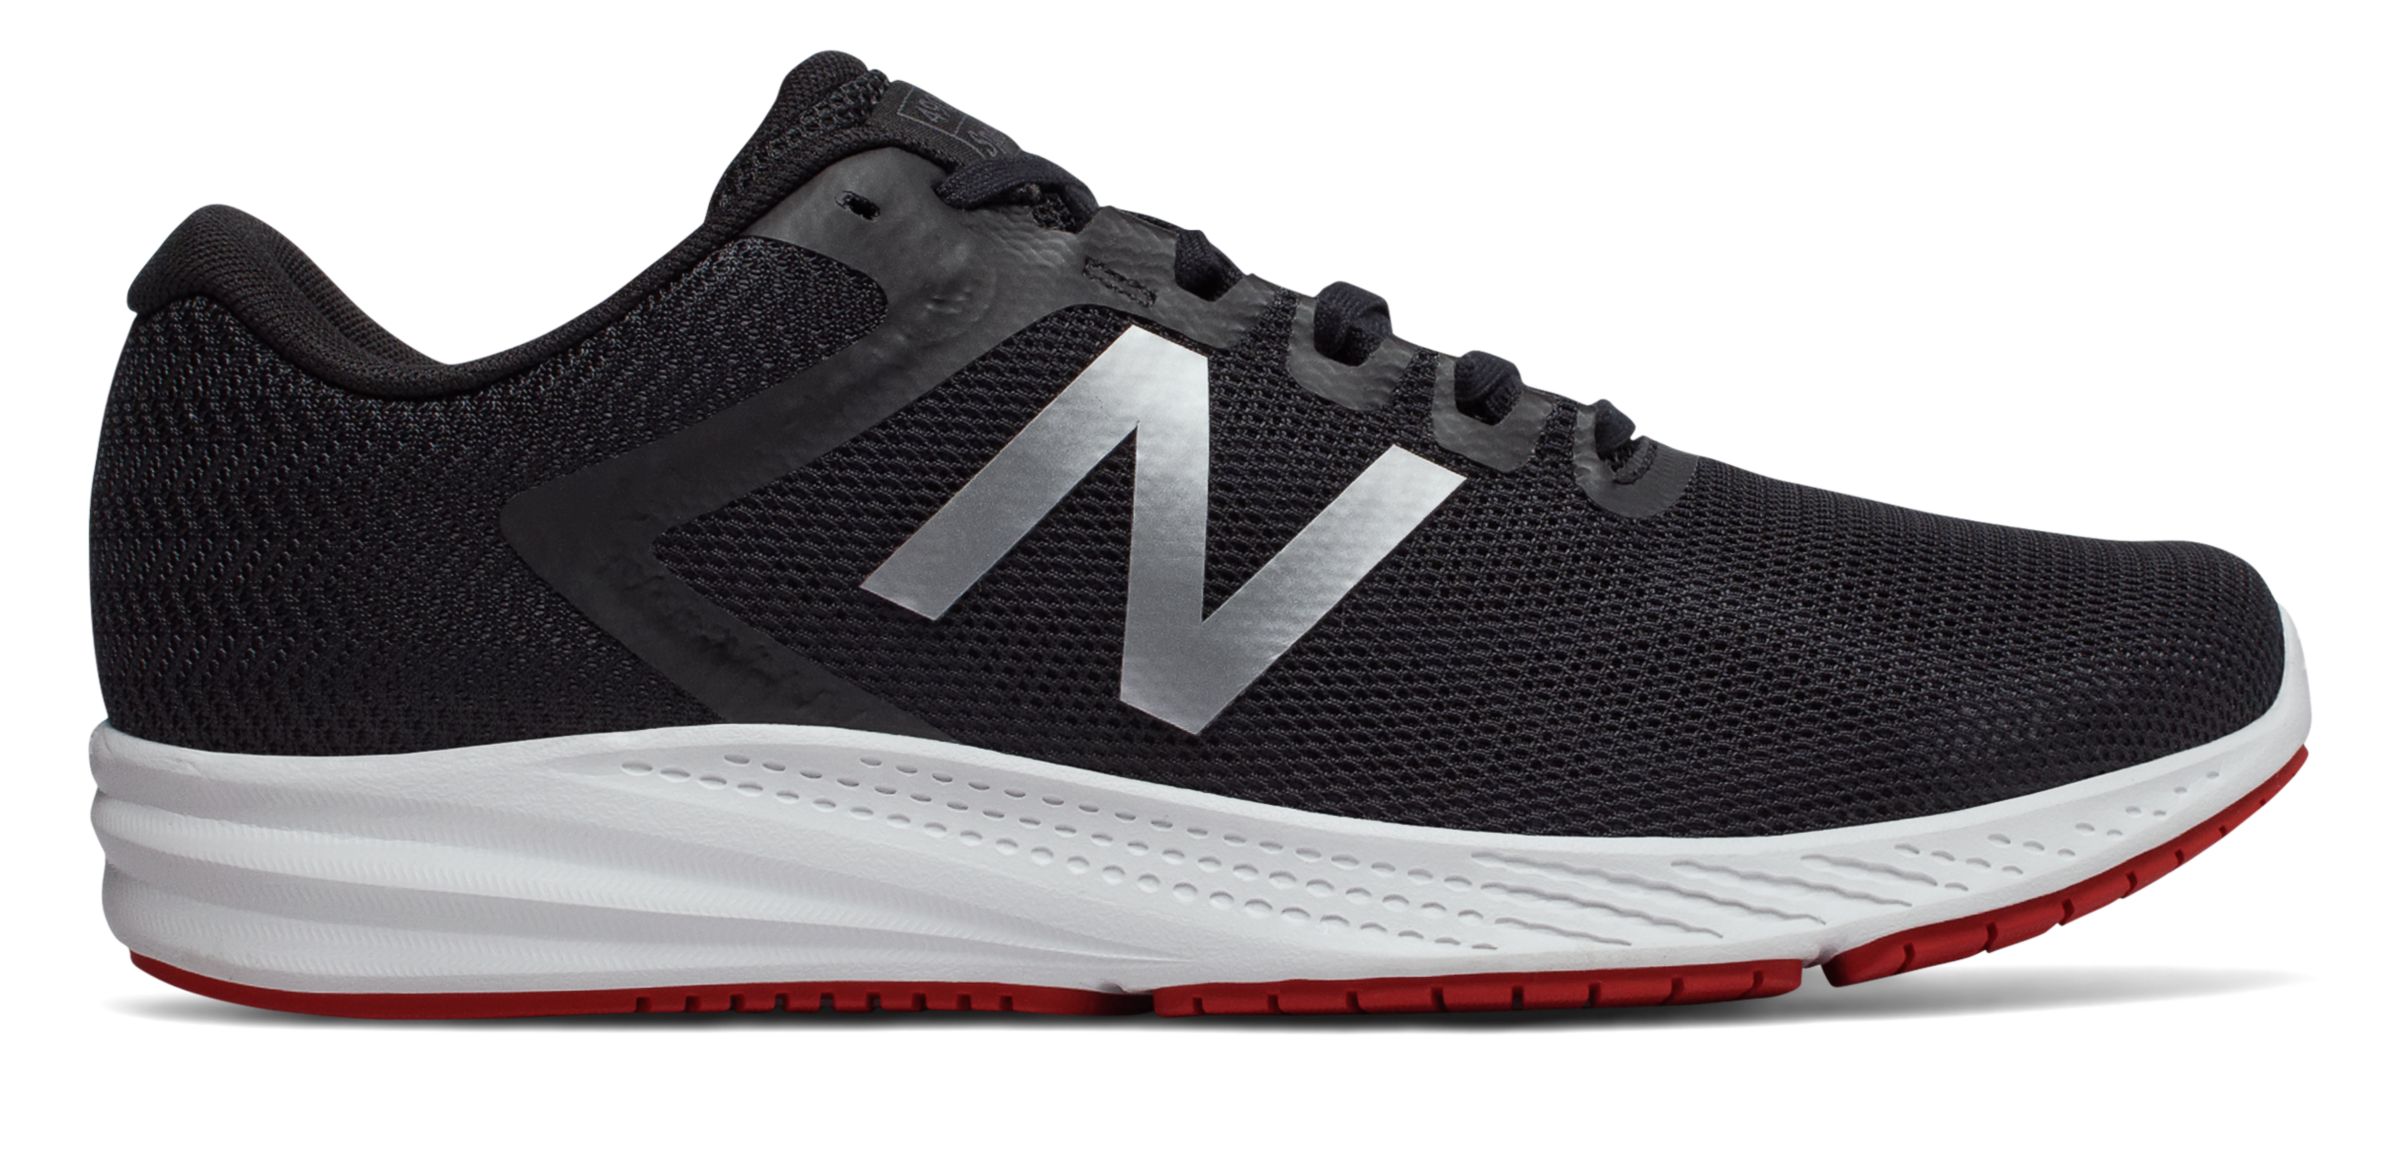 New Balance M490-V6 on Sale - Discounts Up to 45% Off on M490LK6 at Joe's  New Balance Outlet